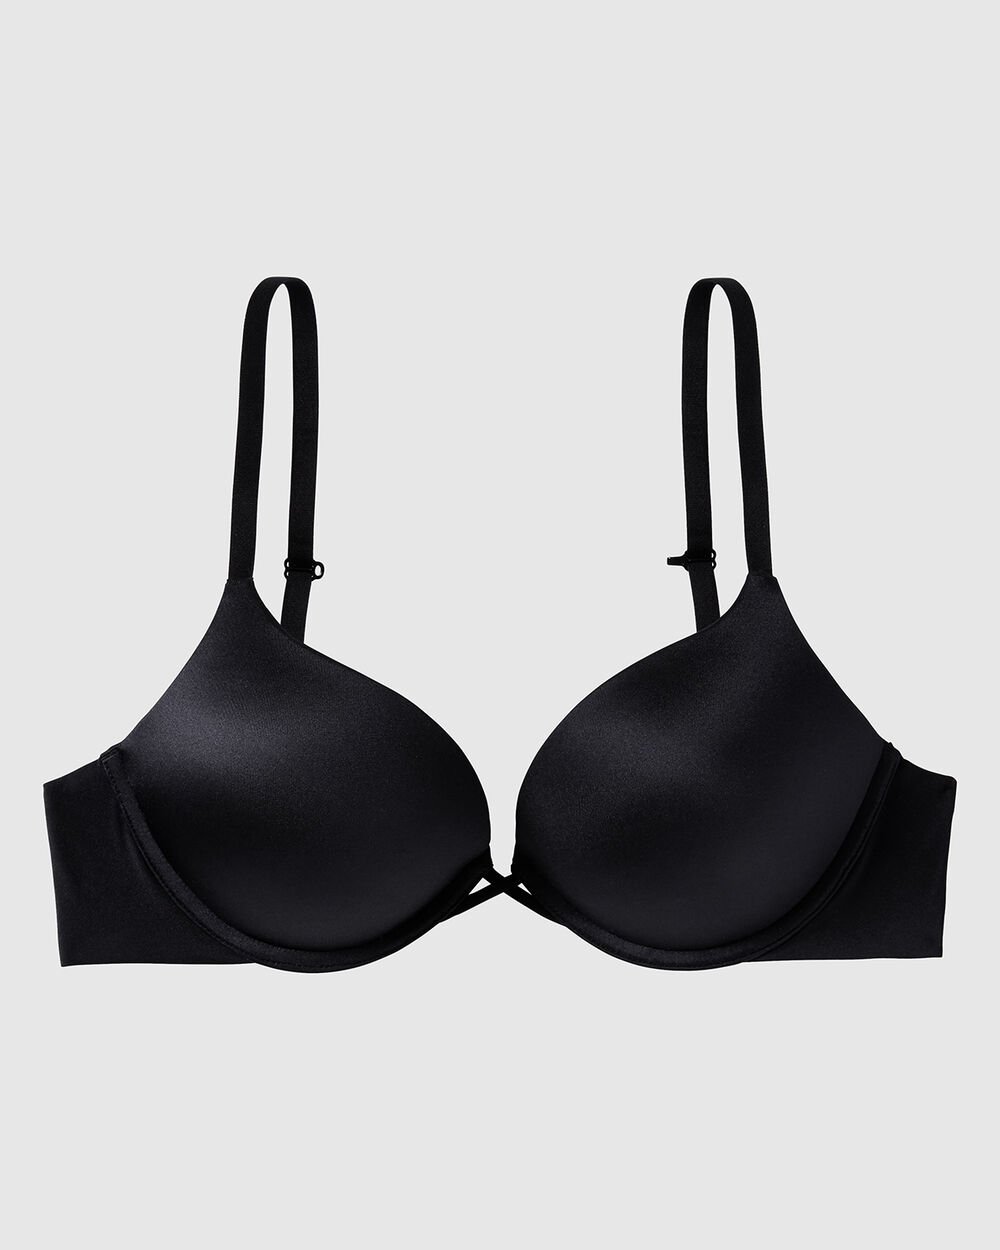 Add Two Cups Bras Brassiere For Women Push Up Padded Unlined,Black